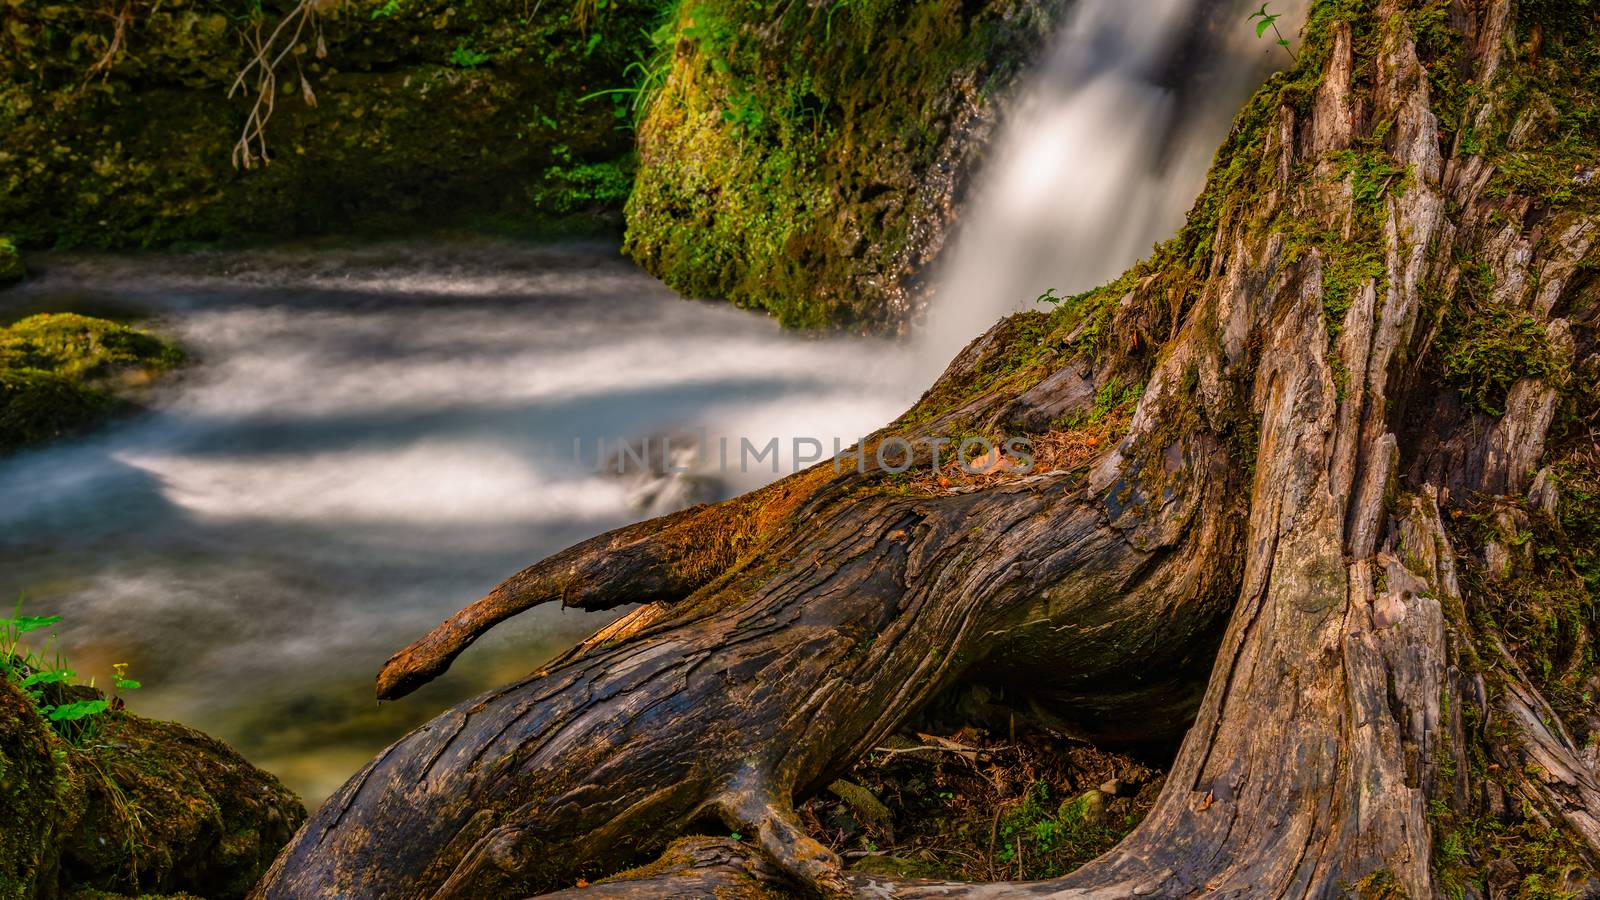 Old rootstock at the waterfall by mindscapephotos